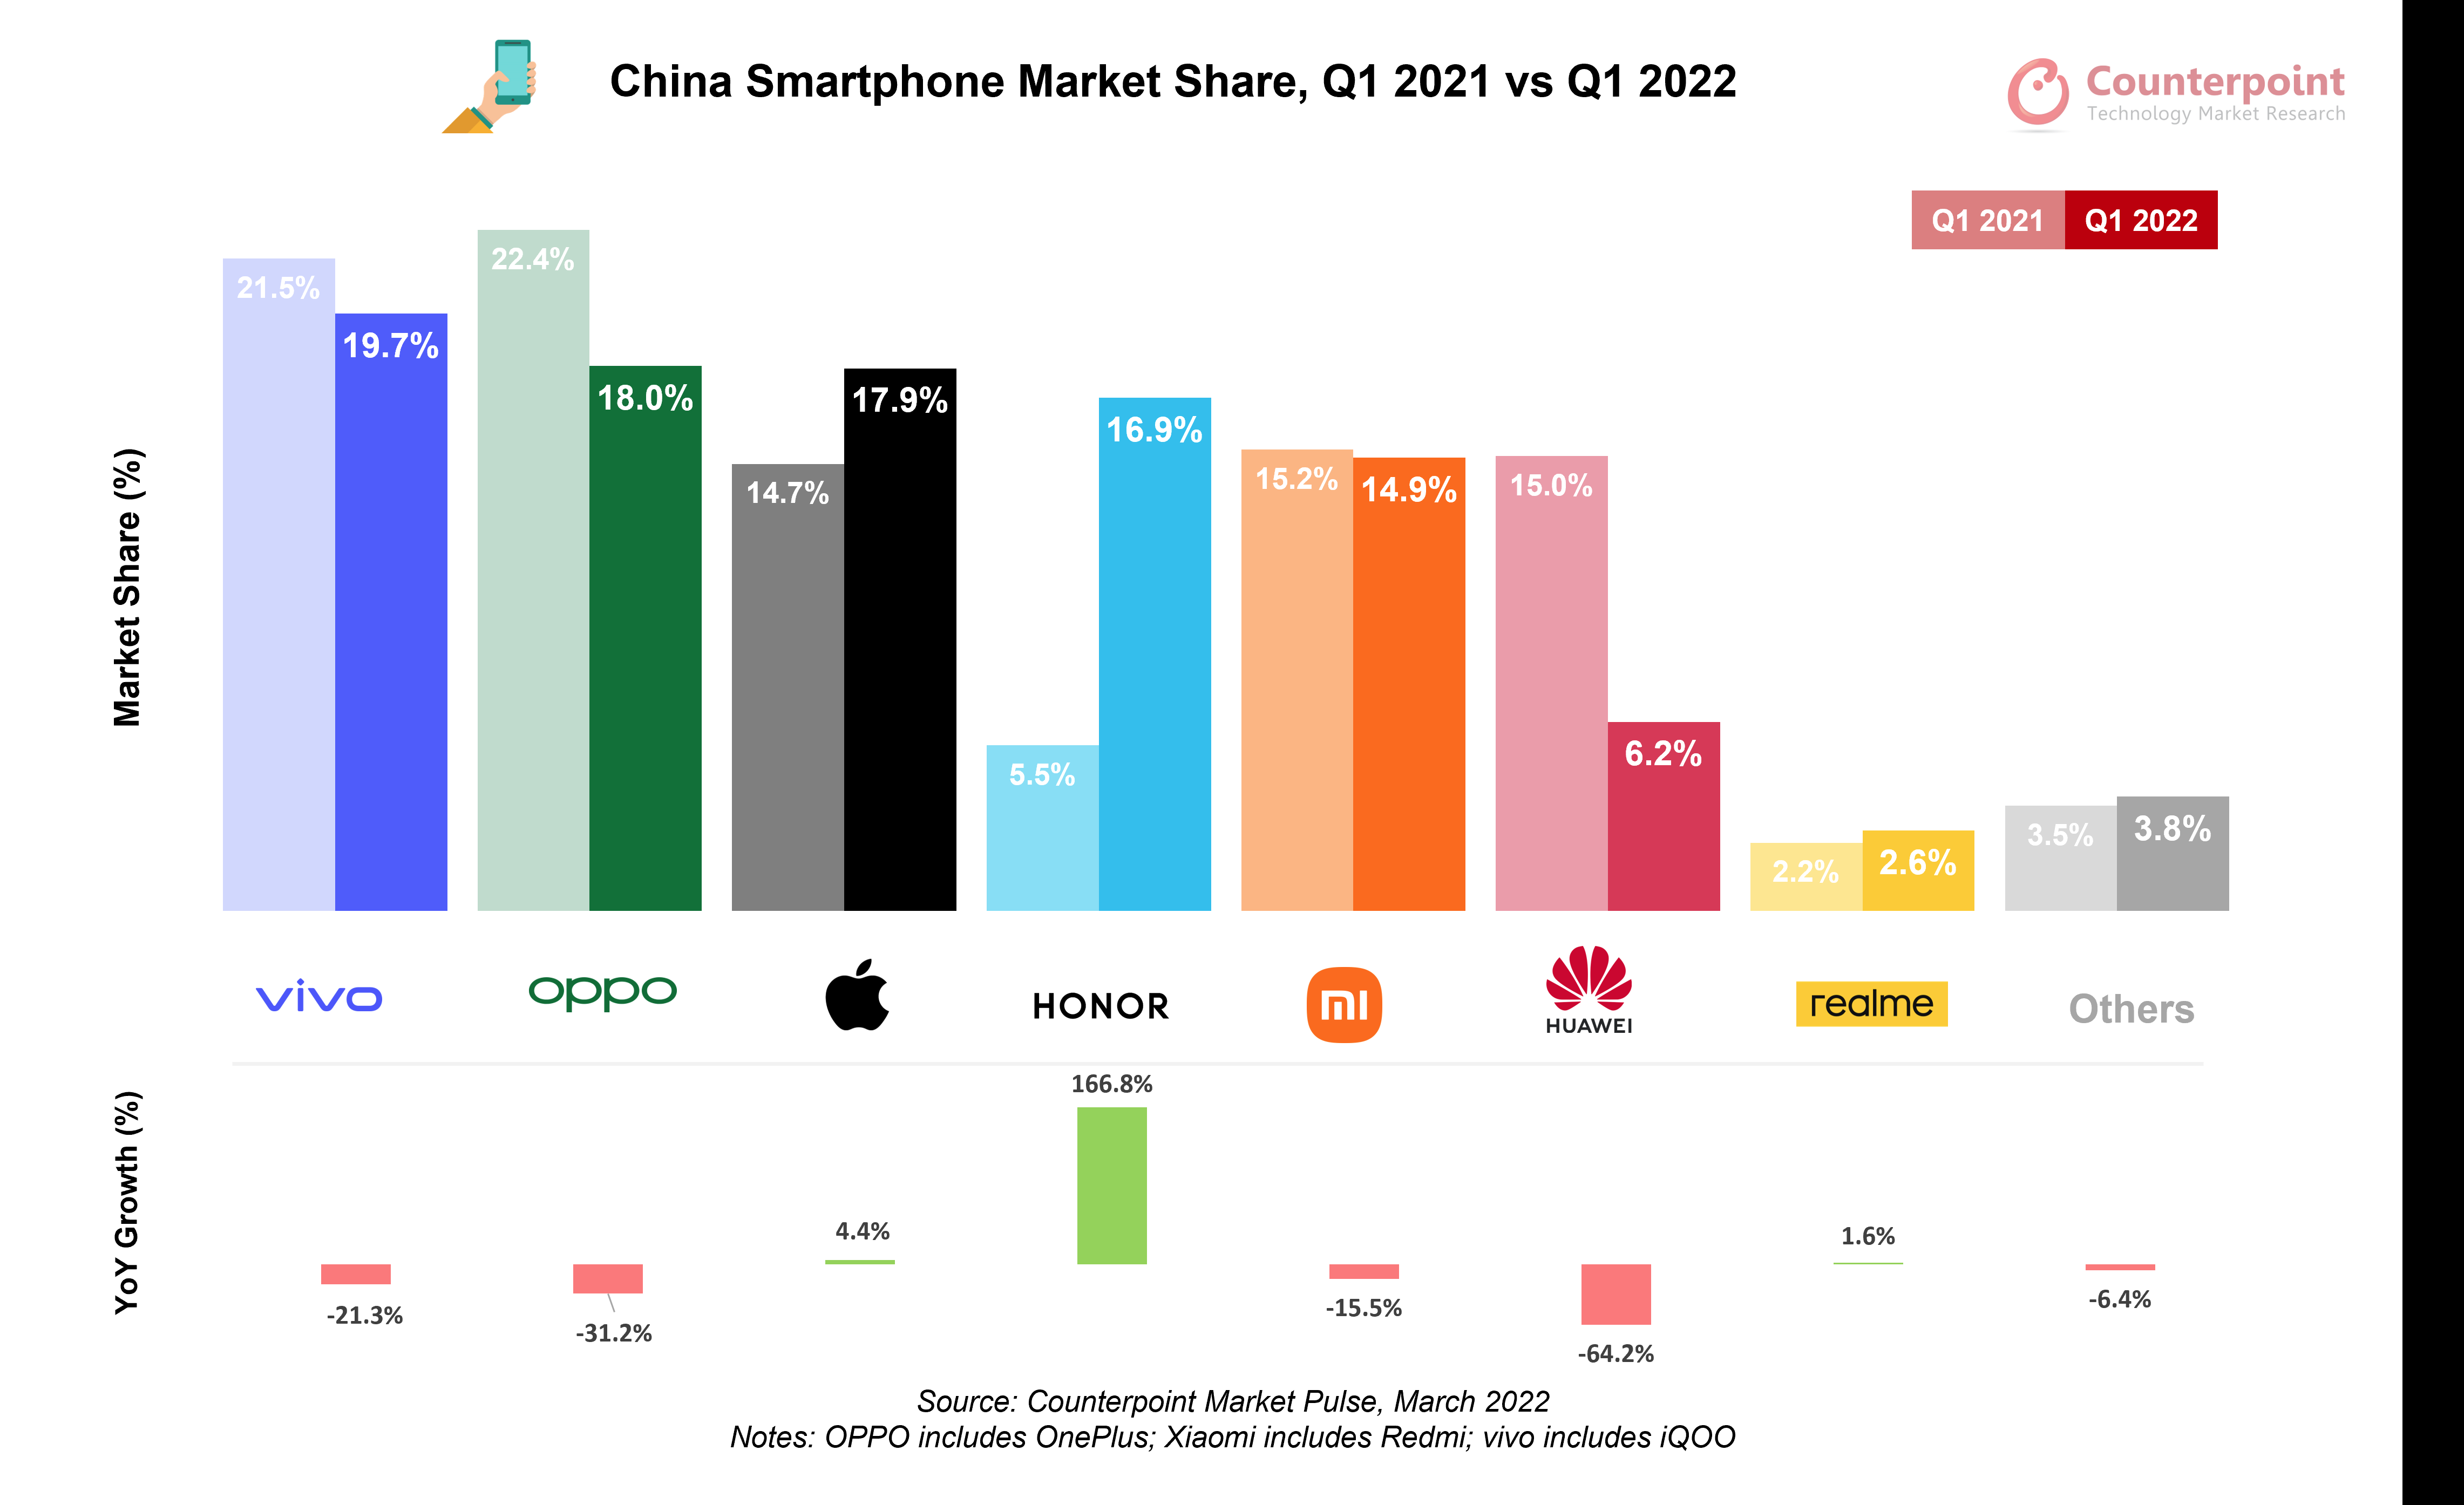 vivo Topped China’s Smartphone Market in Q1 2022 